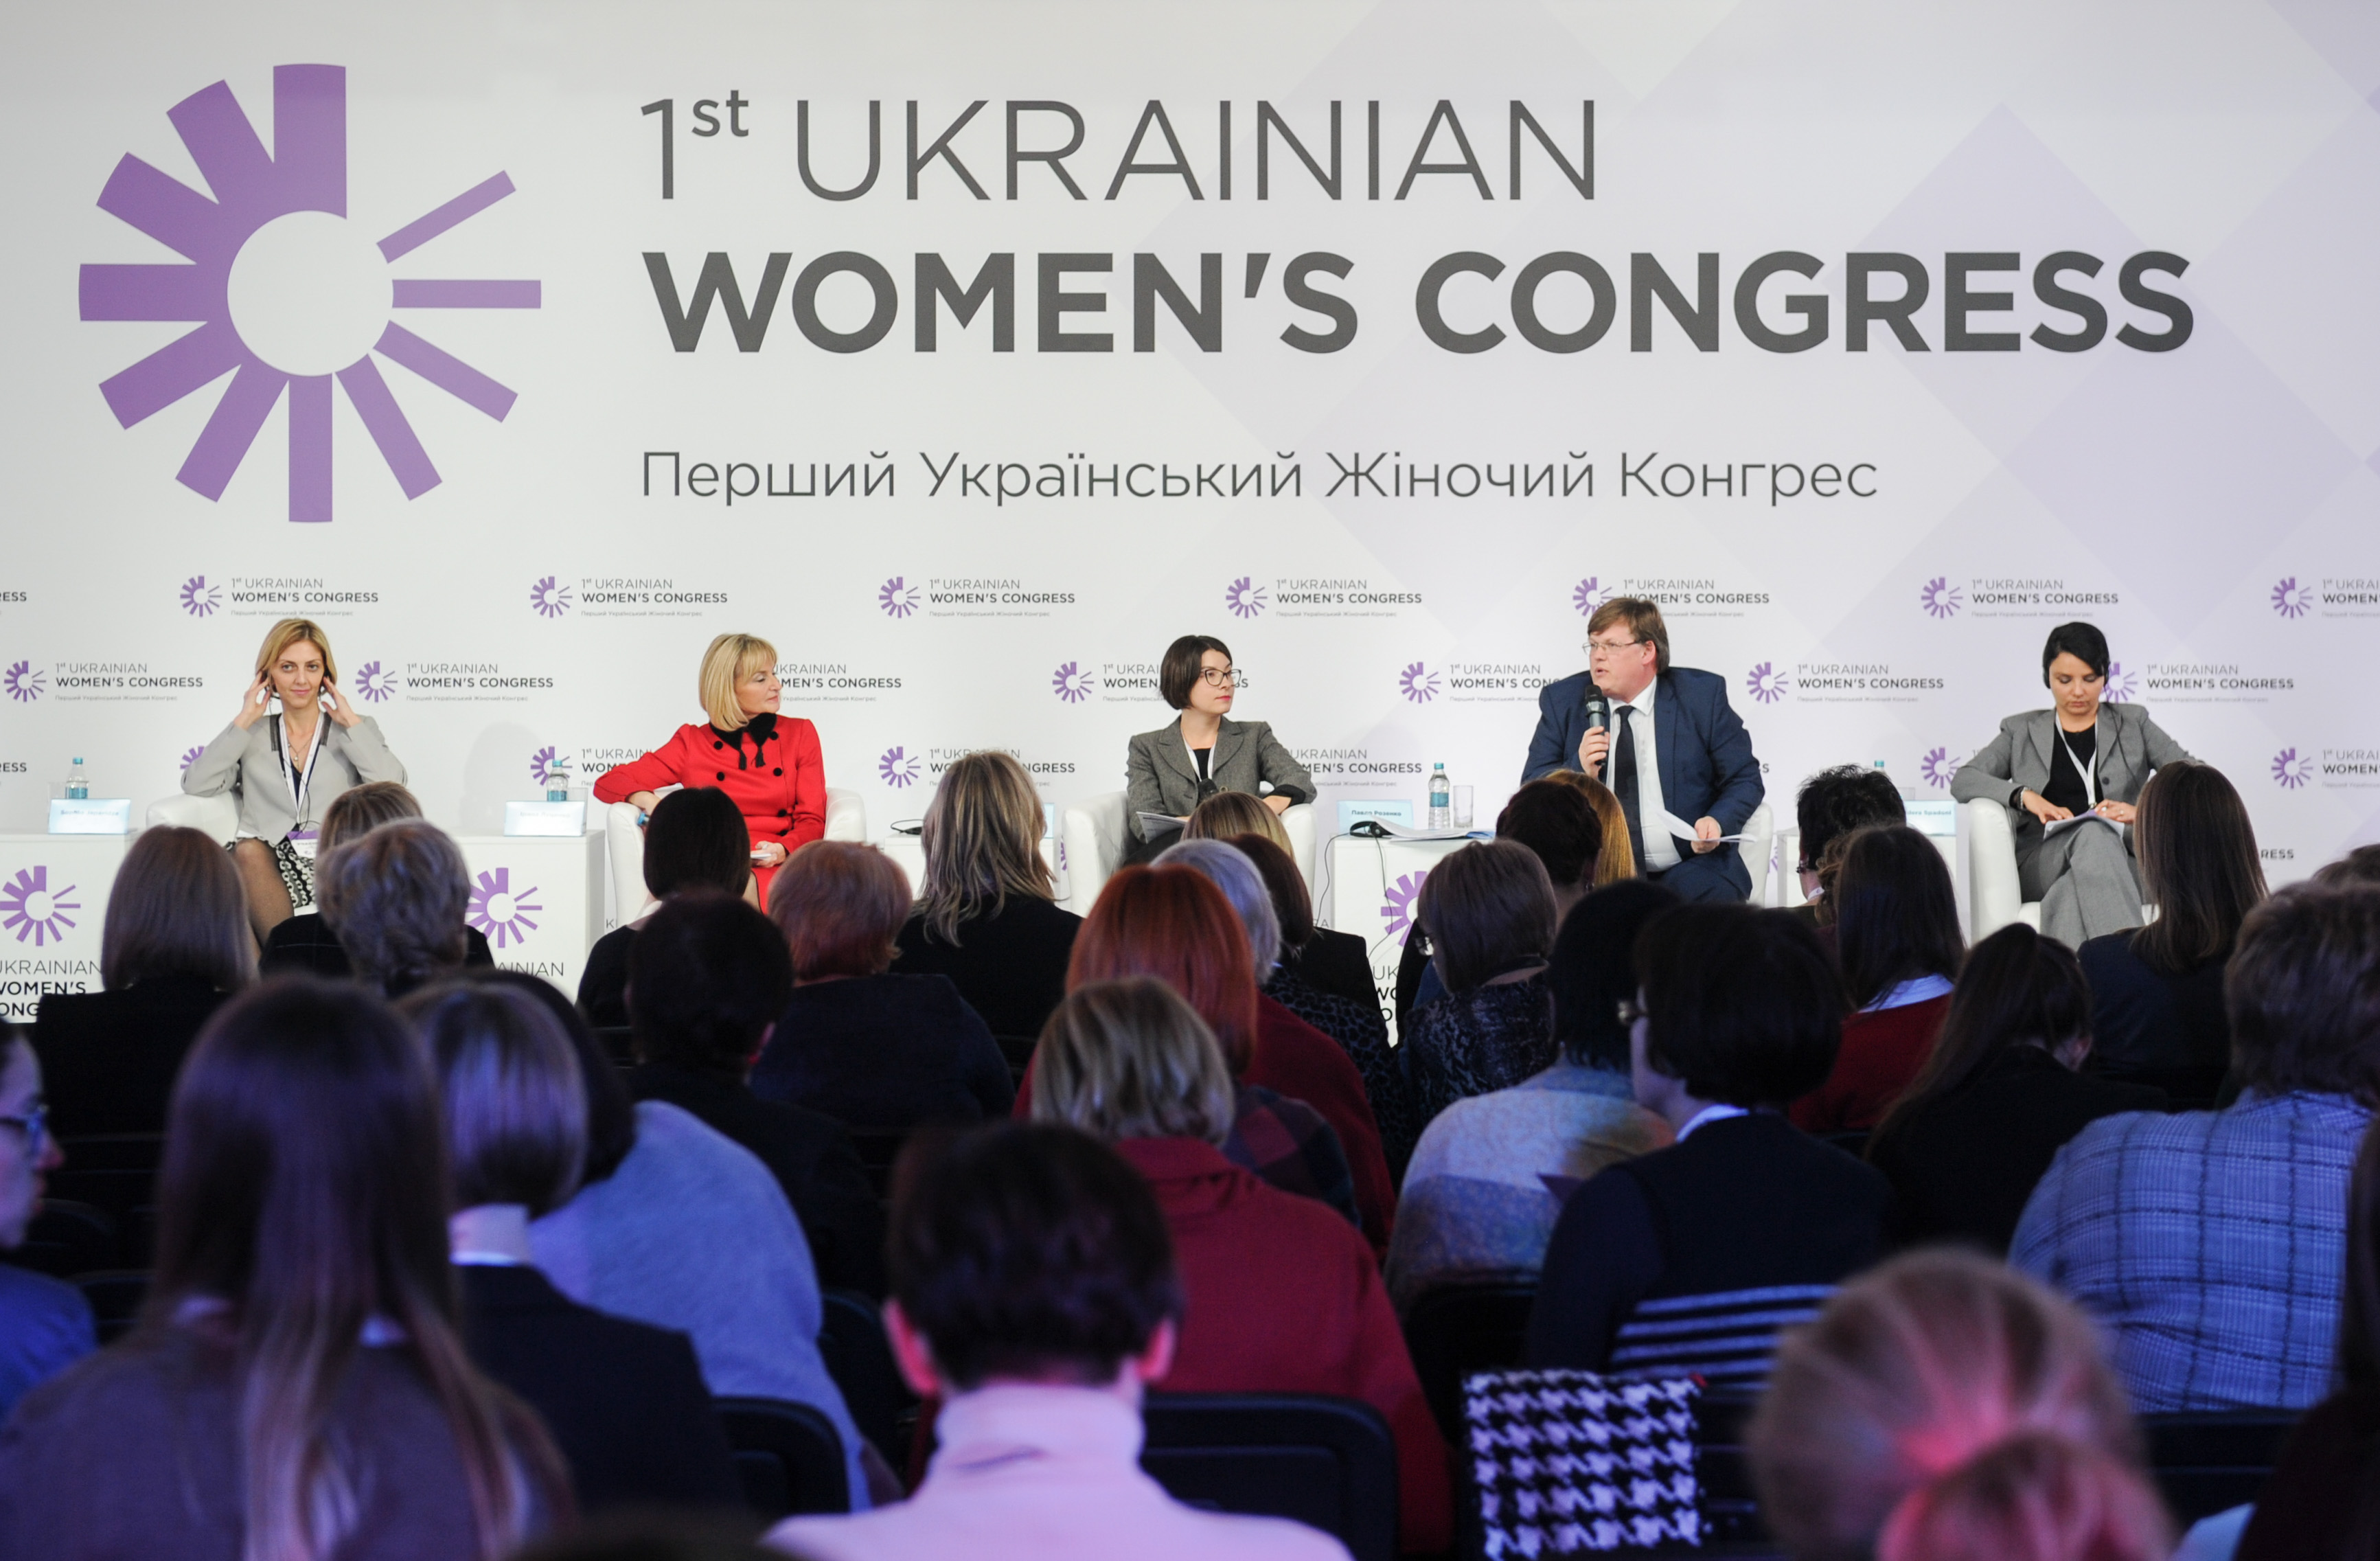 Panel of Speakers at the First Ukrainian Women's Congress